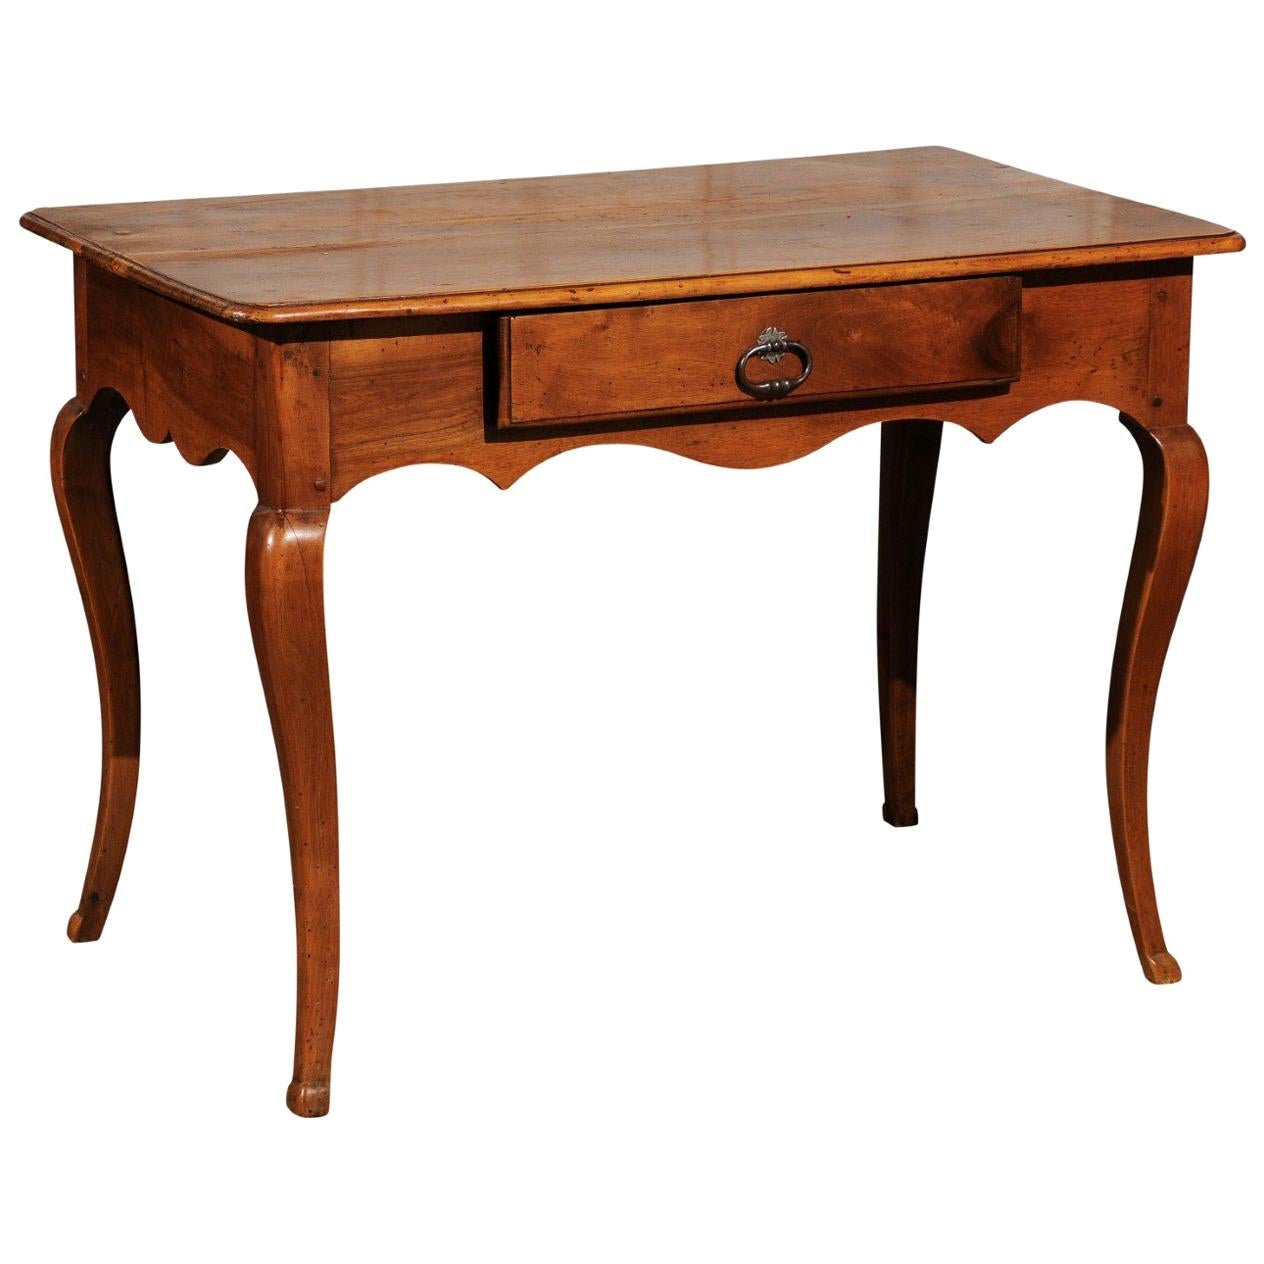 French Period Louis XV 18th Century Walnut Table with Drawer and Cabriole Legs